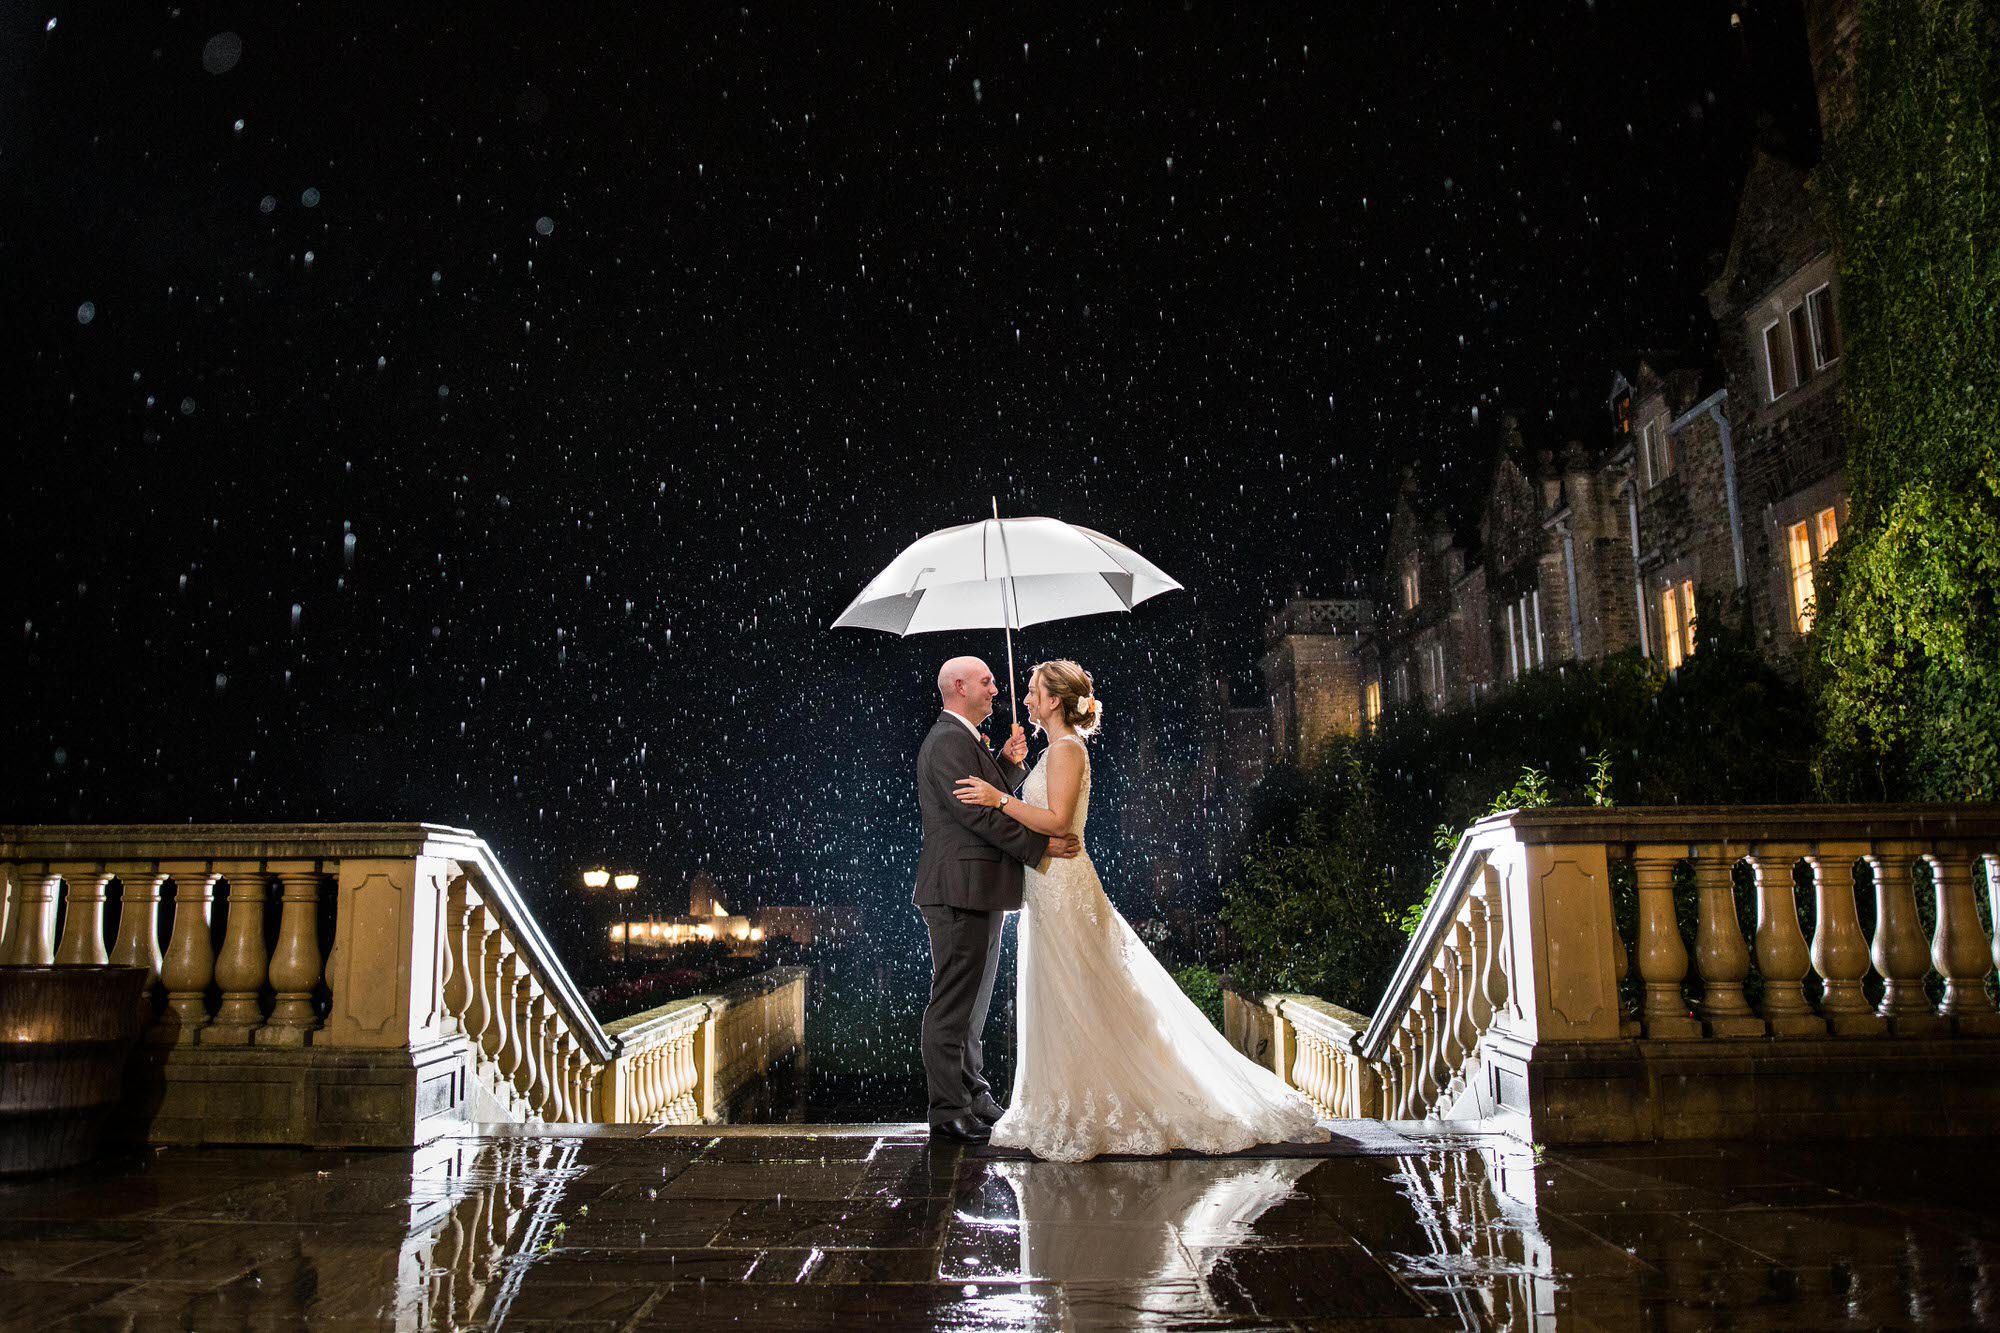 Professional Wedding Photograph in the rain at South Lodge Hotel in Horsham